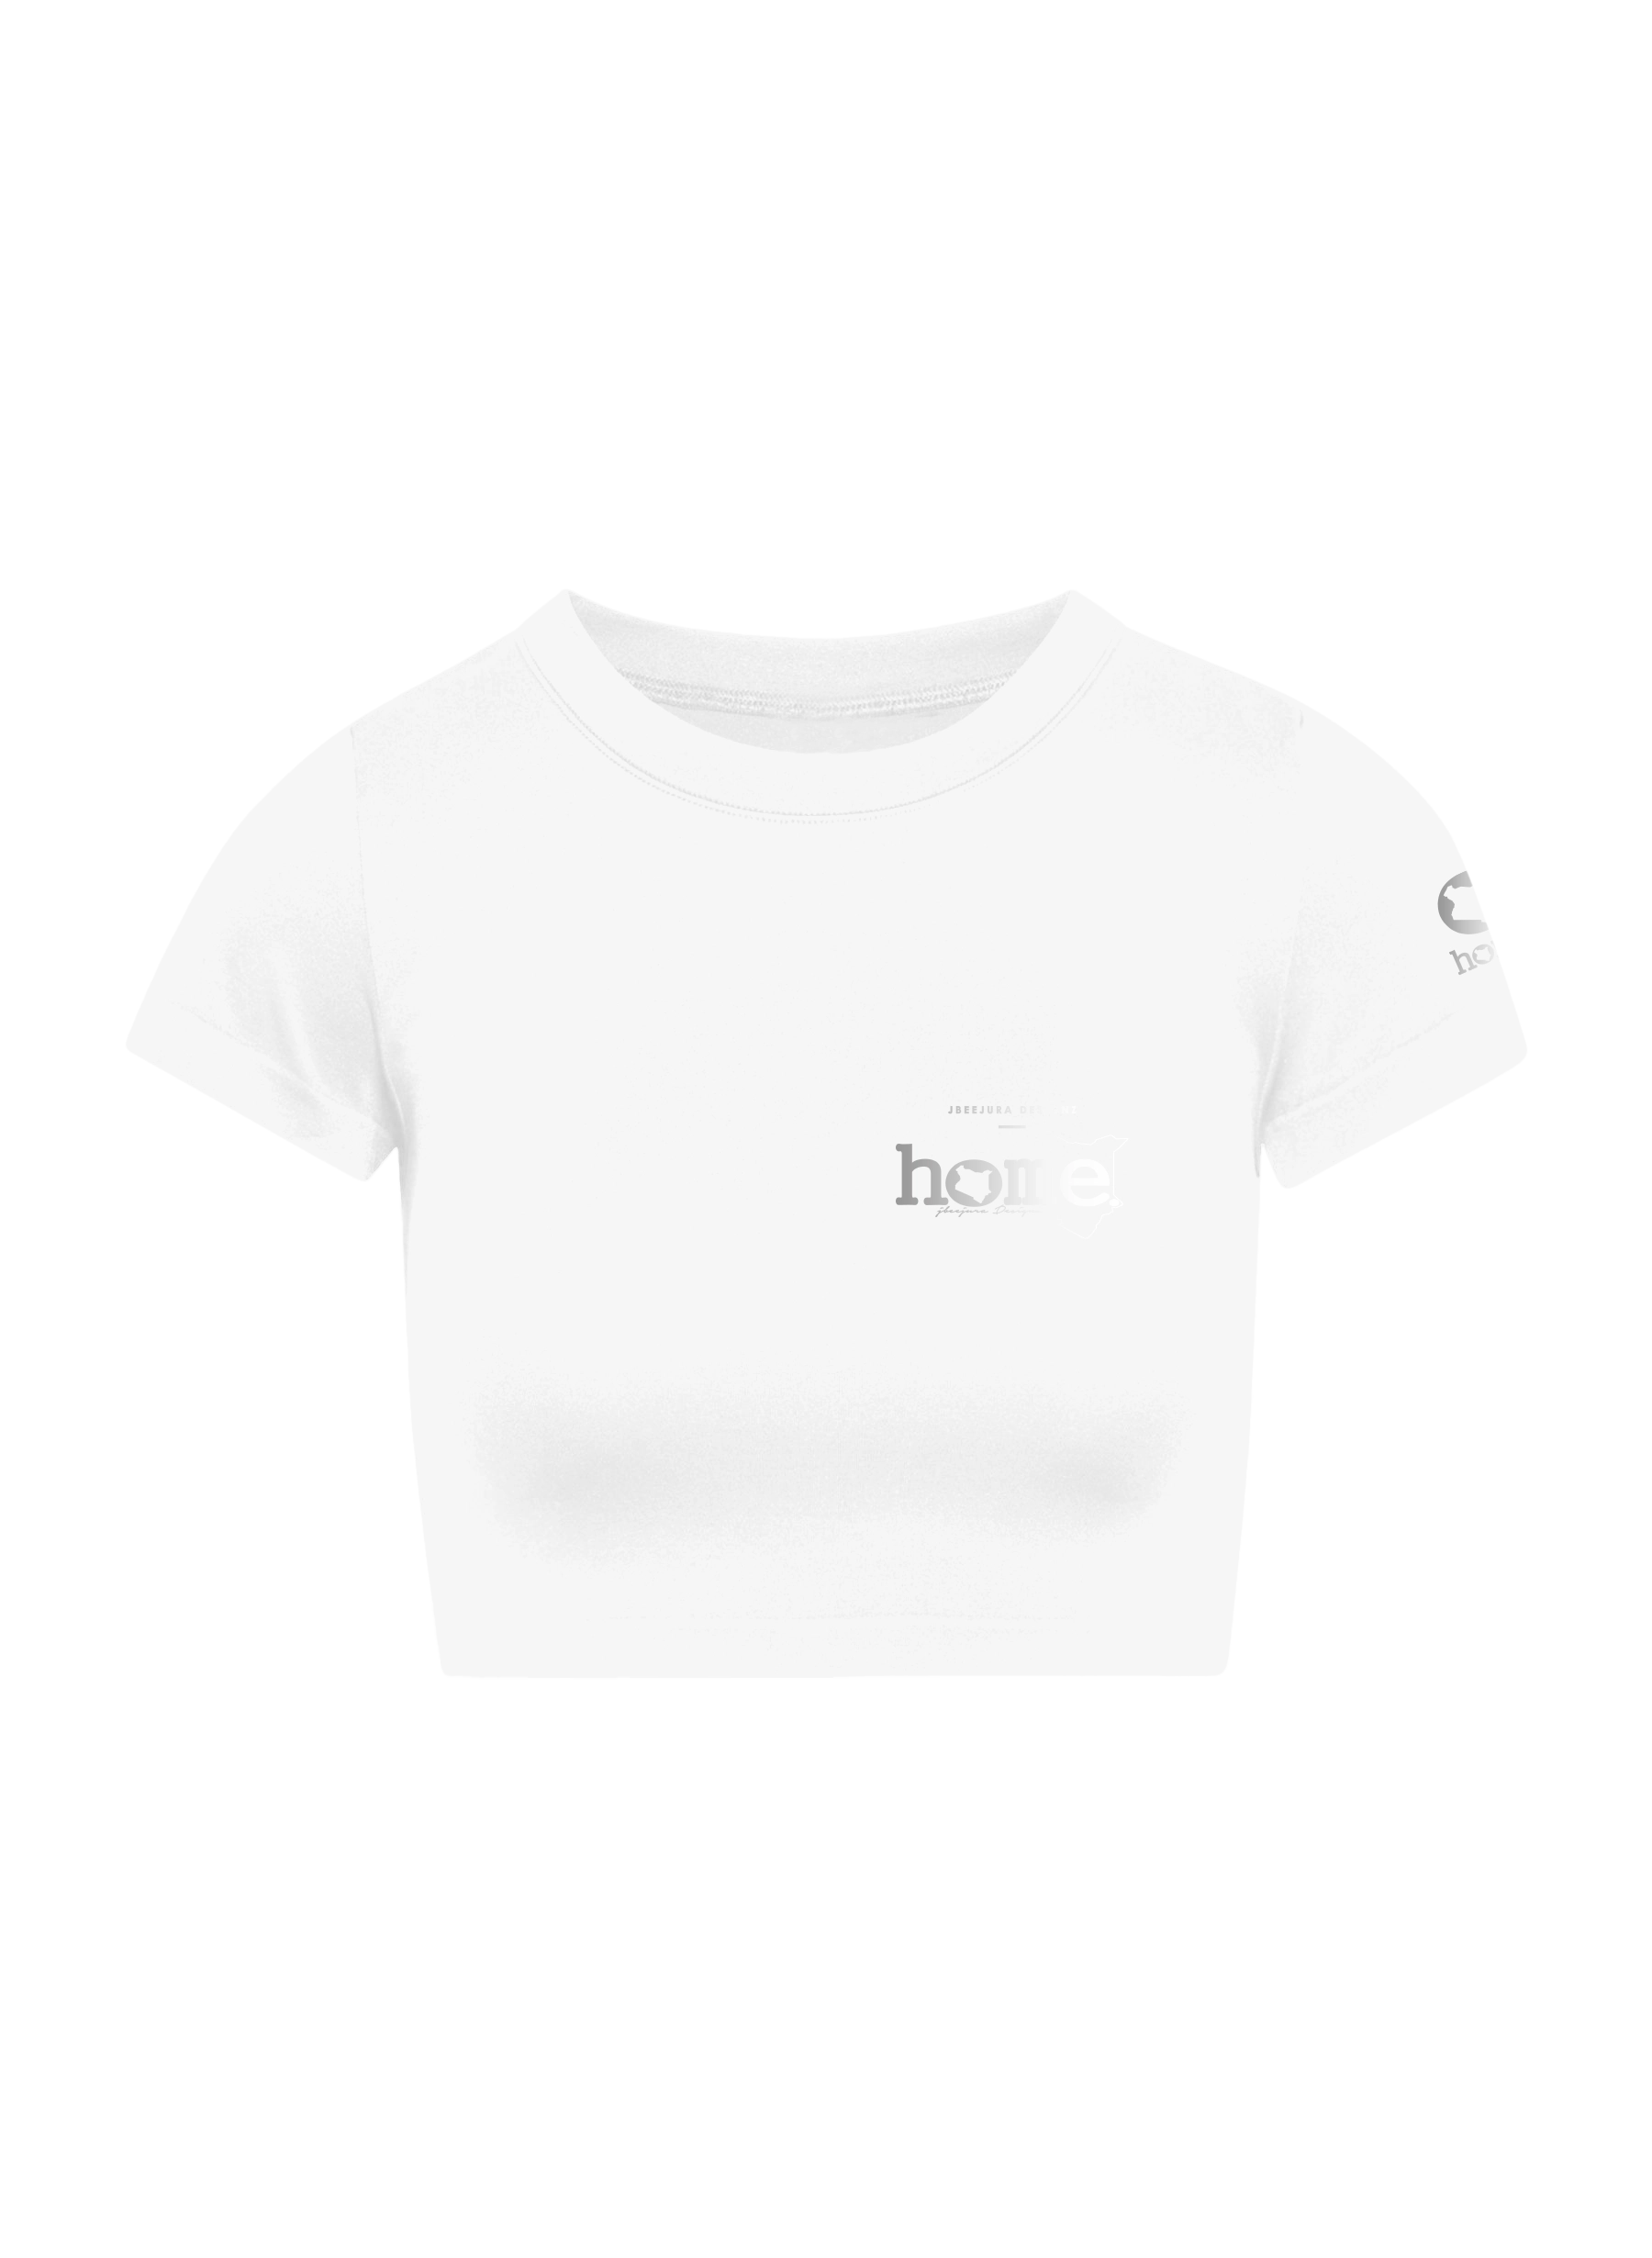 home_254 SHORT SLEEVED WHITE CROPPED ARIA TEE WITH A SILVER 3D WORDS PRINT 